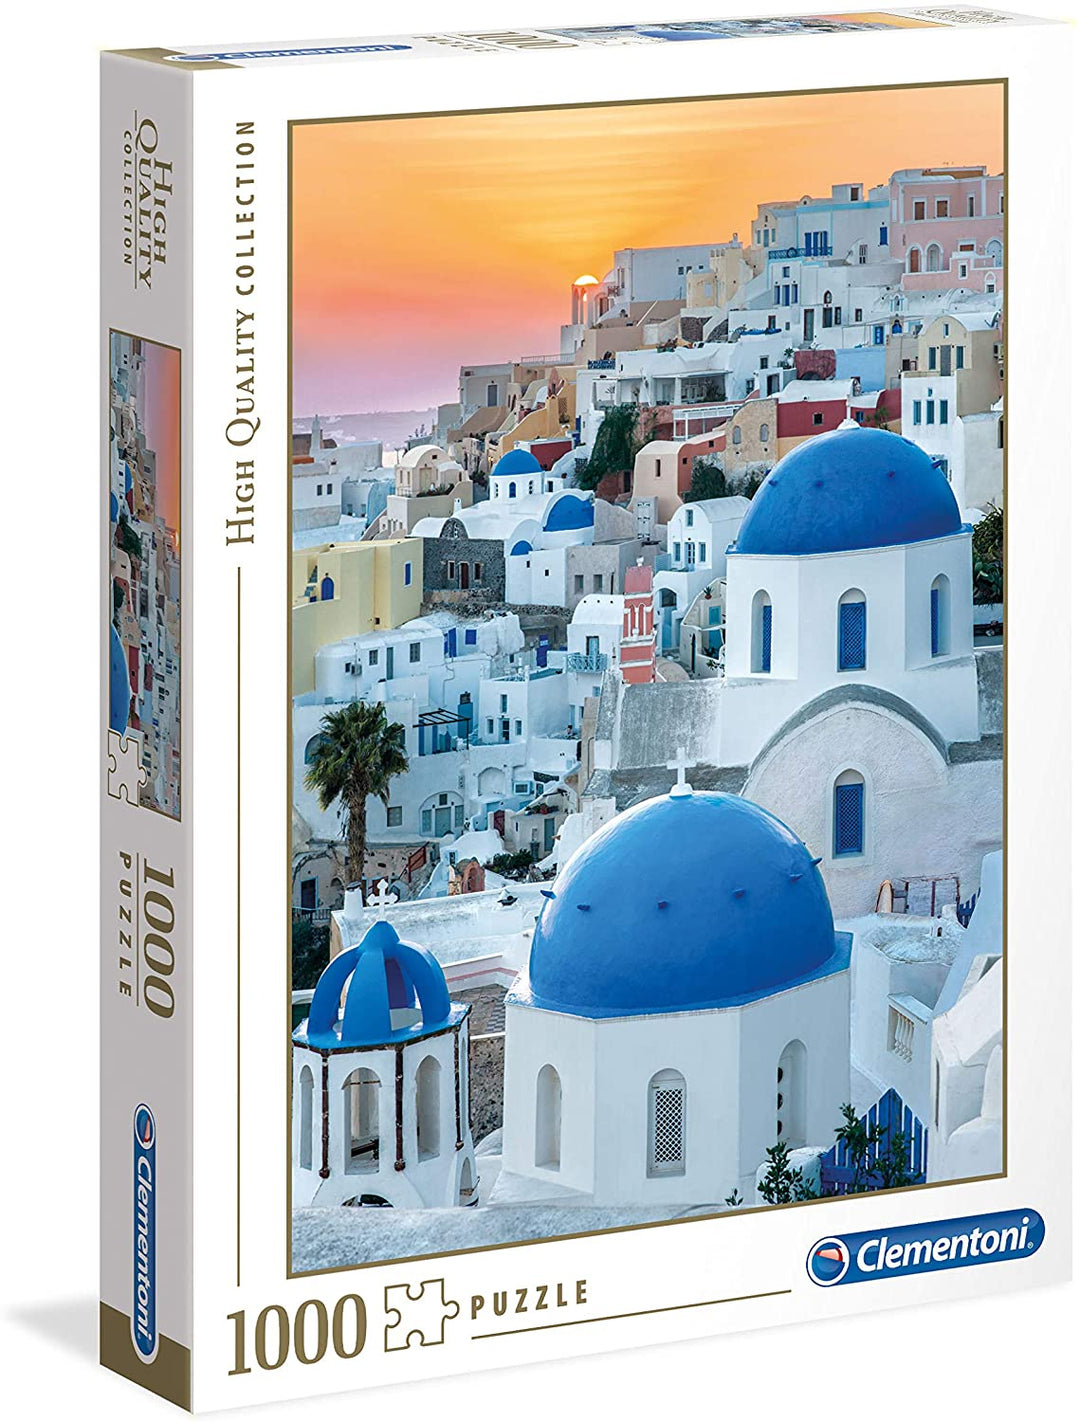 Clementoni 39480 Collection Puzzle for Adults and Children-Santorini-1000 Pieces